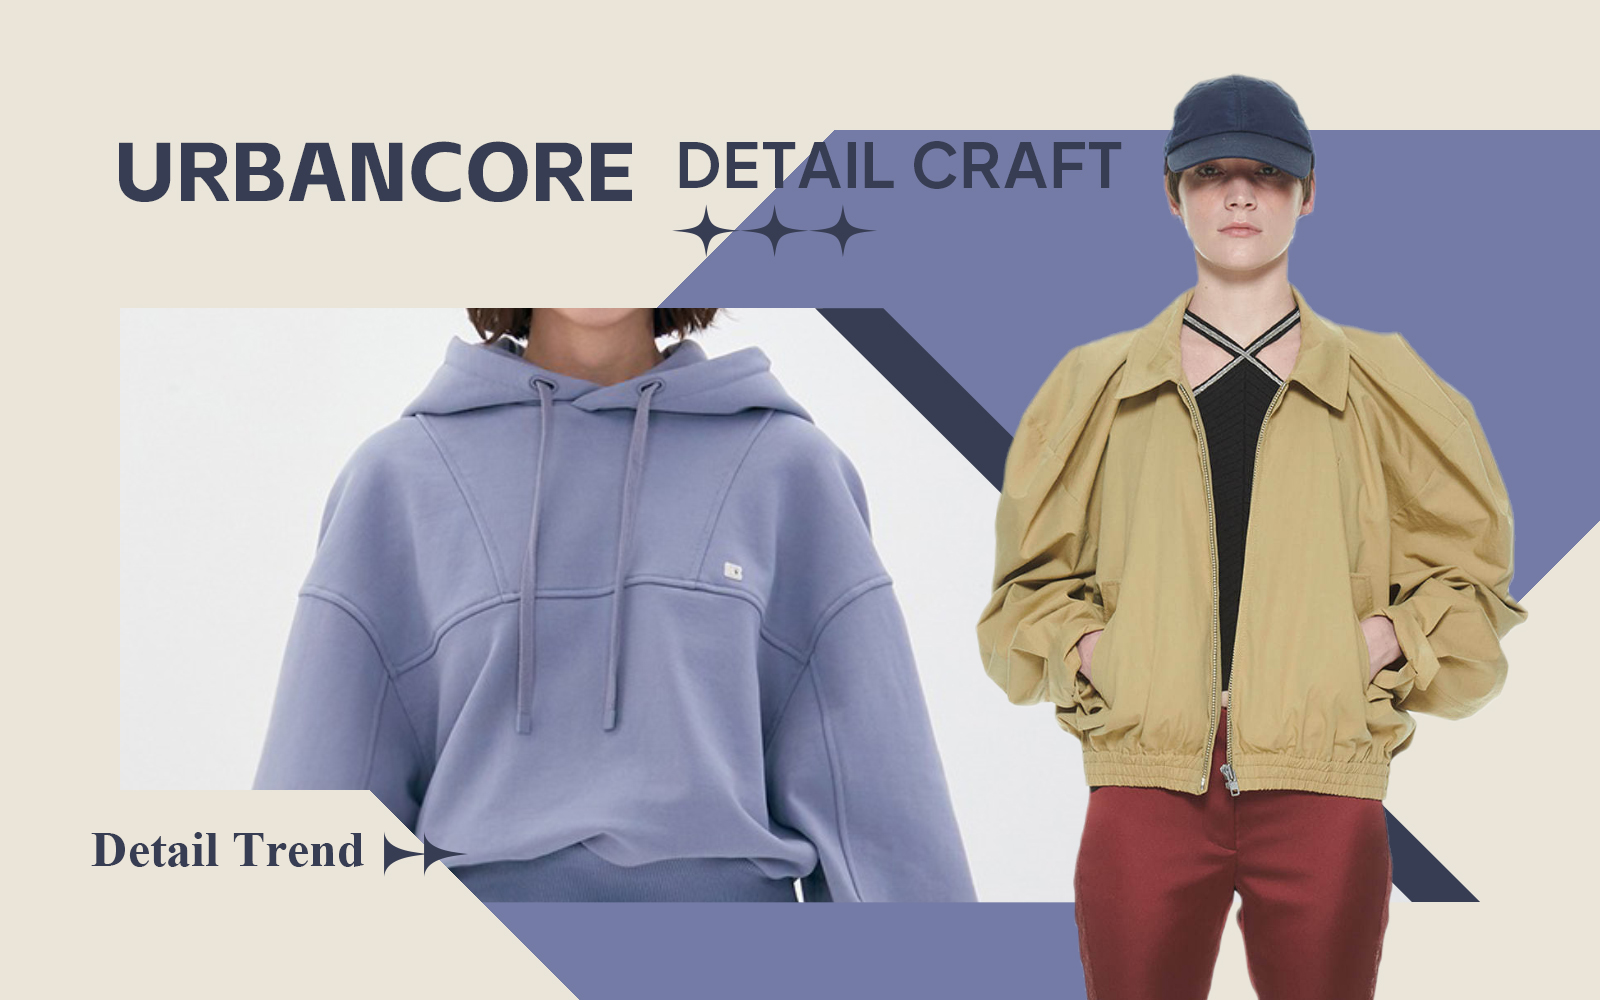 Urbancore -- The Detail & Craft Trend for Womenswear